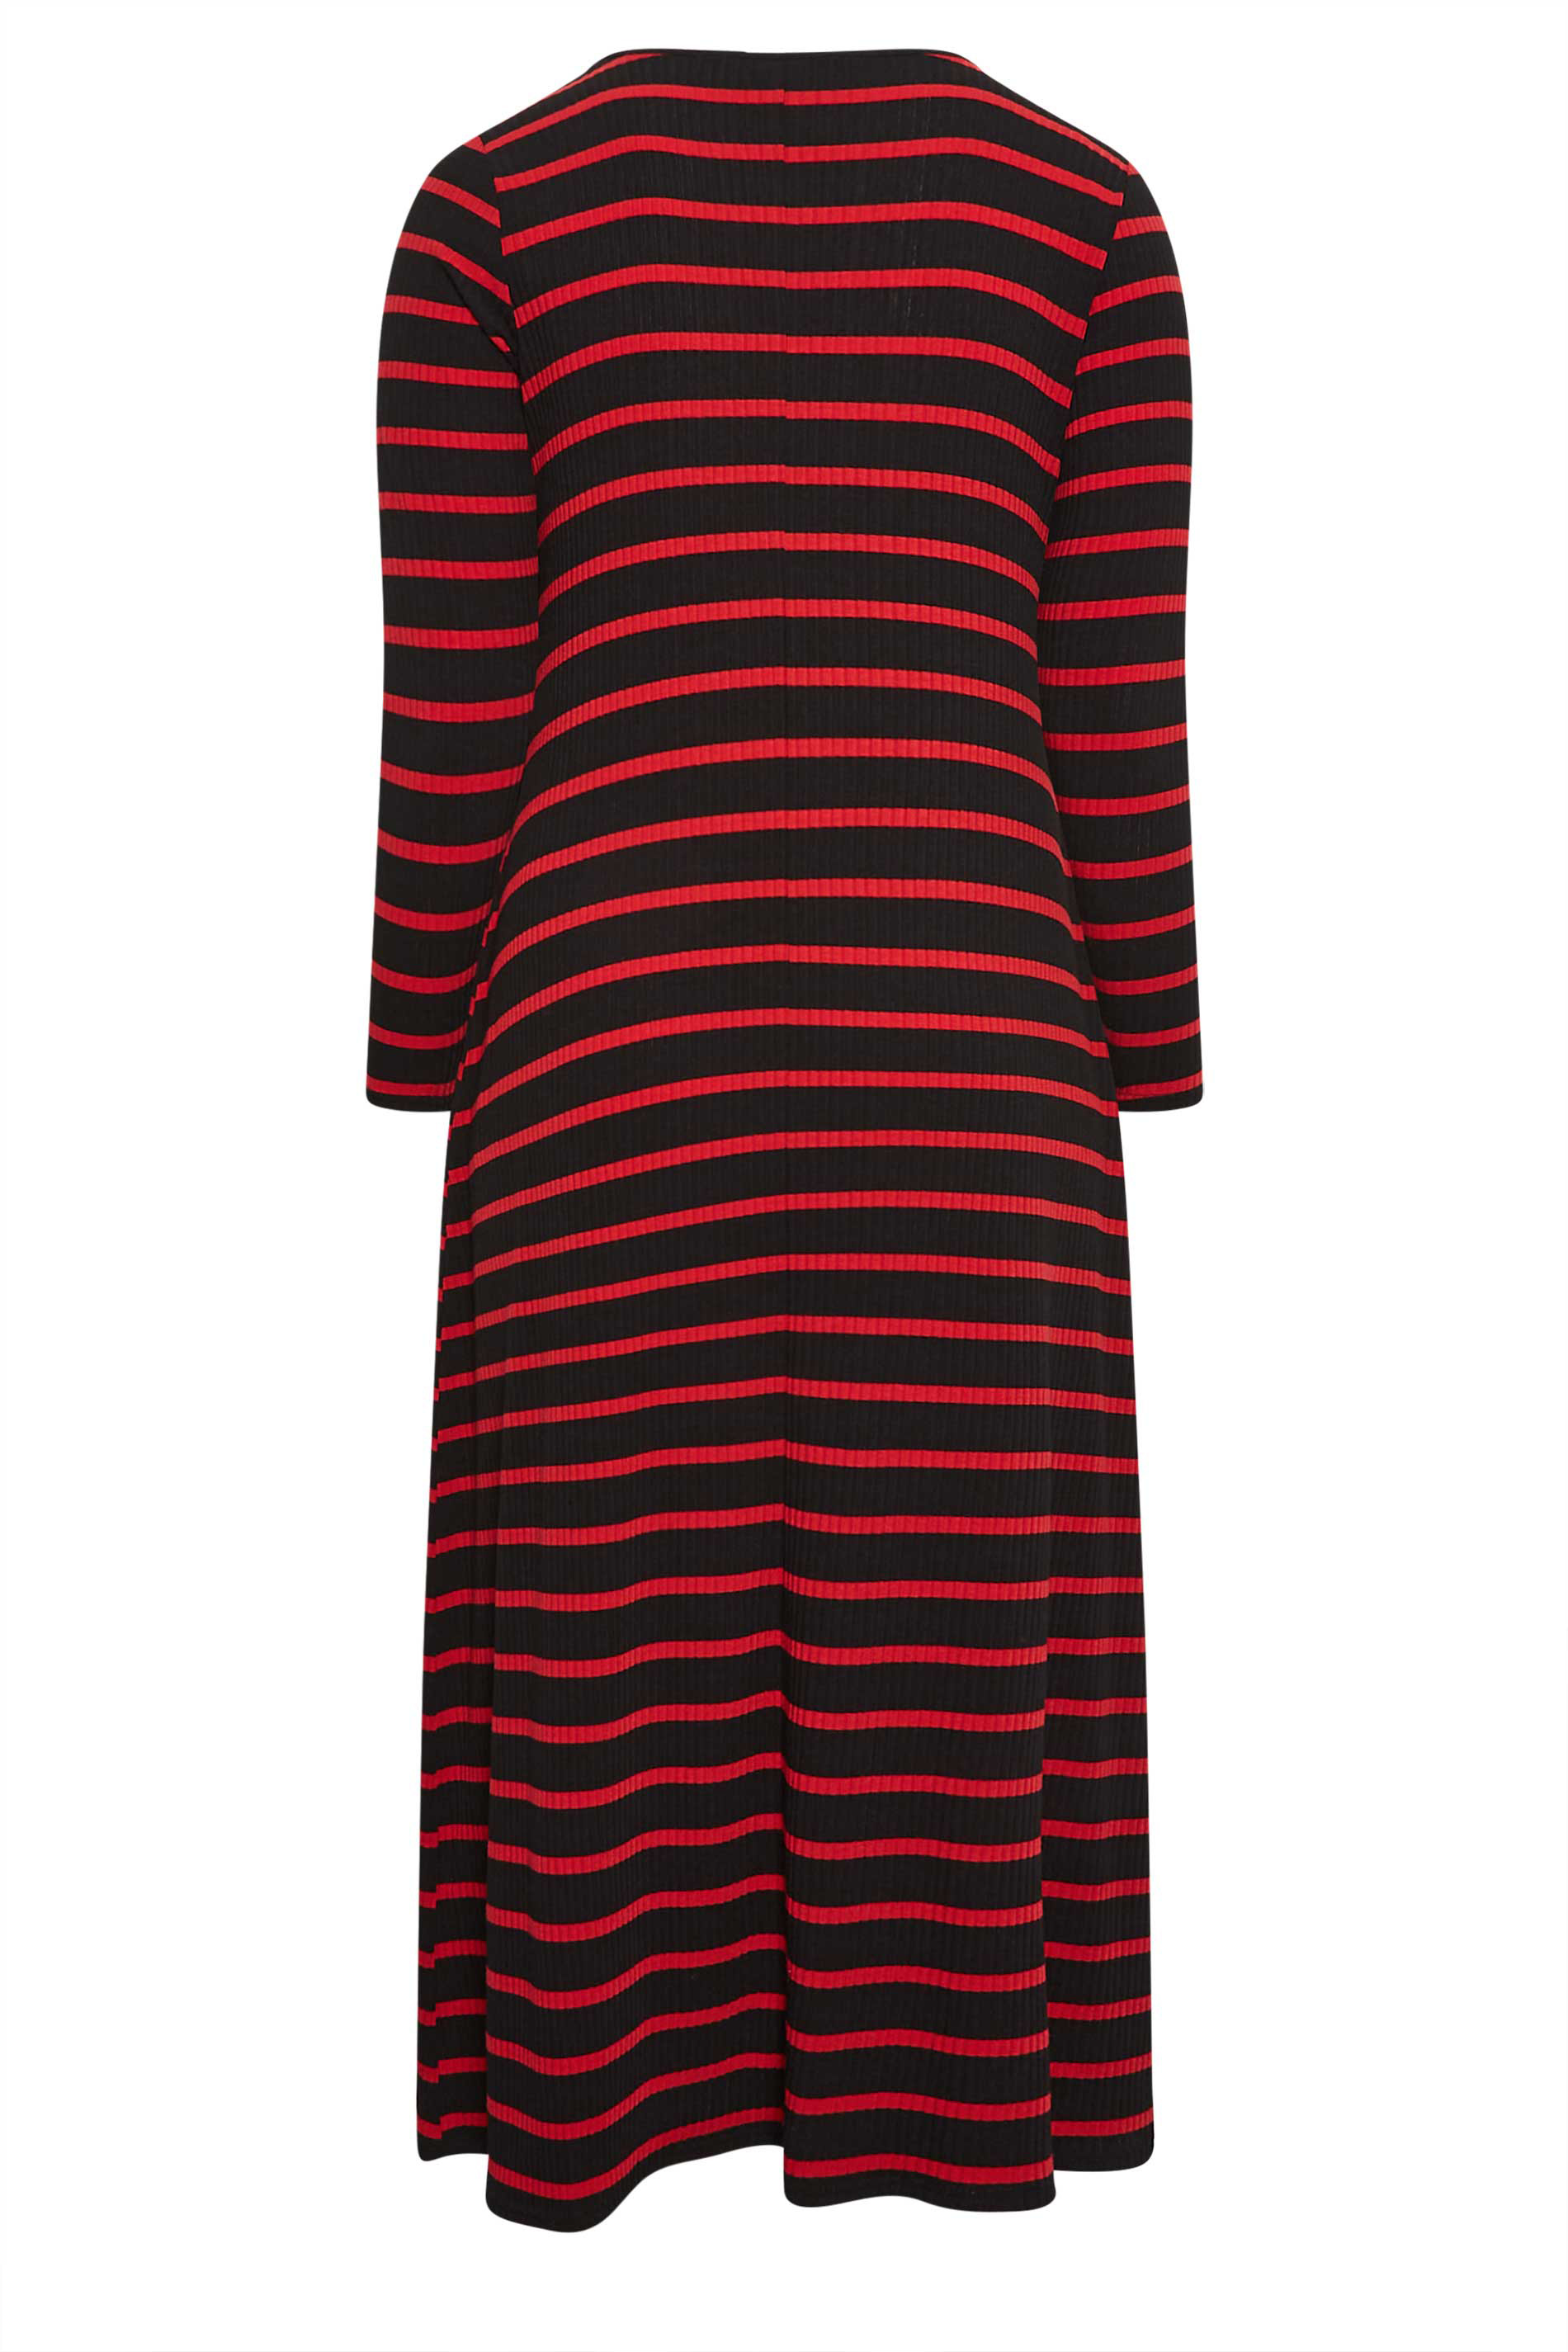 YOURS Curve Red Striped Ribbed | Long Sleeve Yours Dress Maxi Swing Clothing